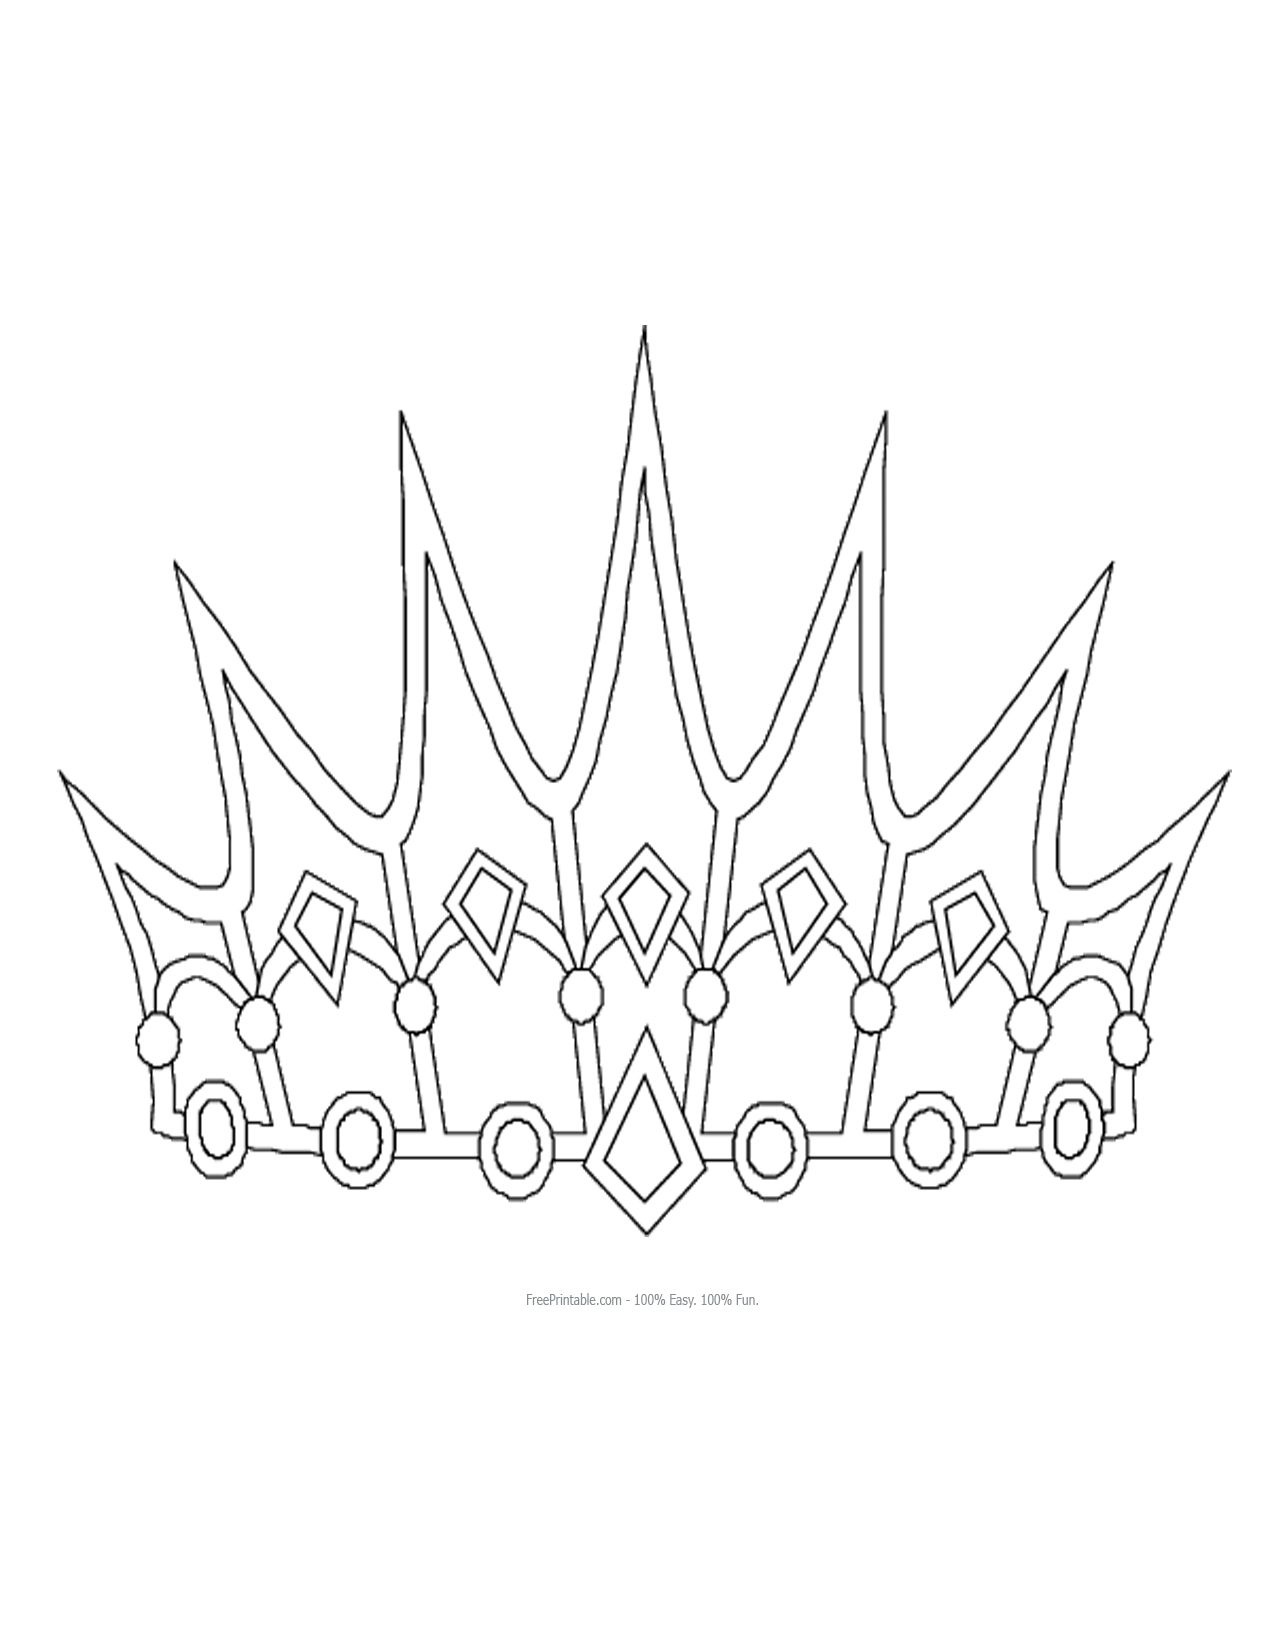 Inspiring King And Queen Crown Templates Colouring In Beatiful Free - Free Printable King Crown Template